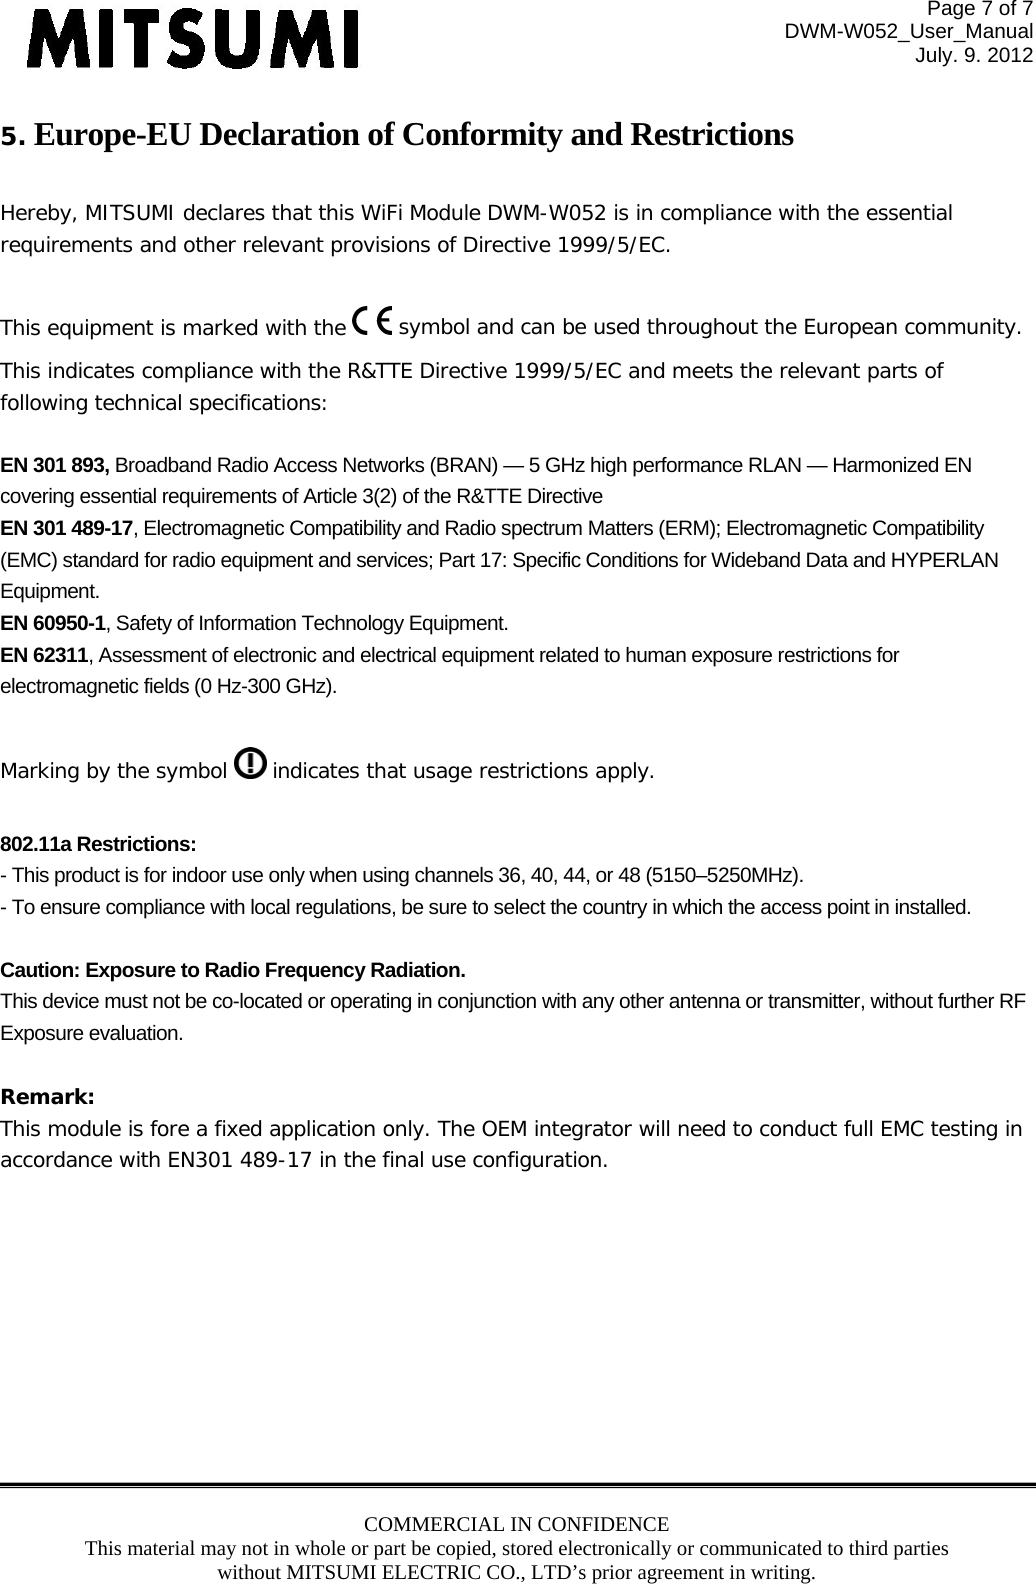 Page 7 of 7 DWM-W052_User_Manual July. 9. 2012 COMMERCIAL IN CONFIDENCE This material may not in whole or part be copied, stored electronically or communicated to third parties without MITSUMI ELECTRIC CO., LTD’s prior agreement in writing.  5. Europe-EU Declaration of Conformity and Restrictions  Hereby, MITSUMI declares that this WiFi Module DWM-W052 is in compliance with the essential requirements and other relevant provisions of Directive 1999/5/EC.  This equipment is marked with the   symbol and can be used throughout the European community. This indicates compliance with the R&amp;TTE Directive 1999/5/EC and meets the relevant parts of following technical specifications:  EN 301 893, Broadband Radio Access Networks (BRAN) — 5 GHz high performance RLAN — Harmonized EN covering essential requirements of Article 3(2) of the R&amp;TTE Directive EN 301 489-17, Electromagnetic Compatibility and Radio spectrum Matters (ERM); Electromagnetic Compatibility (EMC) standard for radio equipment and services; Part 17: Specific Conditions for Wideband Data and HYPERLAN Equipment. EN 60950-1, Safety of Information Technology Equipment. EN 62311, Assessment of electronic and electrical equipment related to human exposure restrictions for electromagnetic fields (0 Hz-300 GHz).  Marking by the symbol   indicates that usage restrictions apply.  802.11a Restrictions: - This product is for indoor use only when using channels 36, 40, 44, or 48 (5150–5250MHz). - To ensure compliance with local regulations, be sure to select the country in which the access point in installed.  Caution: Exposure to Radio Frequency Radiation. This device must not be co-located or operating in conjunction with any other antenna or transmitter, without further RF Exposure evaluation.   Remark:  This module is fore a fixed application only. The OEM integrator will need to conduct full EMC testing in accordance with EN301 489-17 in the final use configuration.   